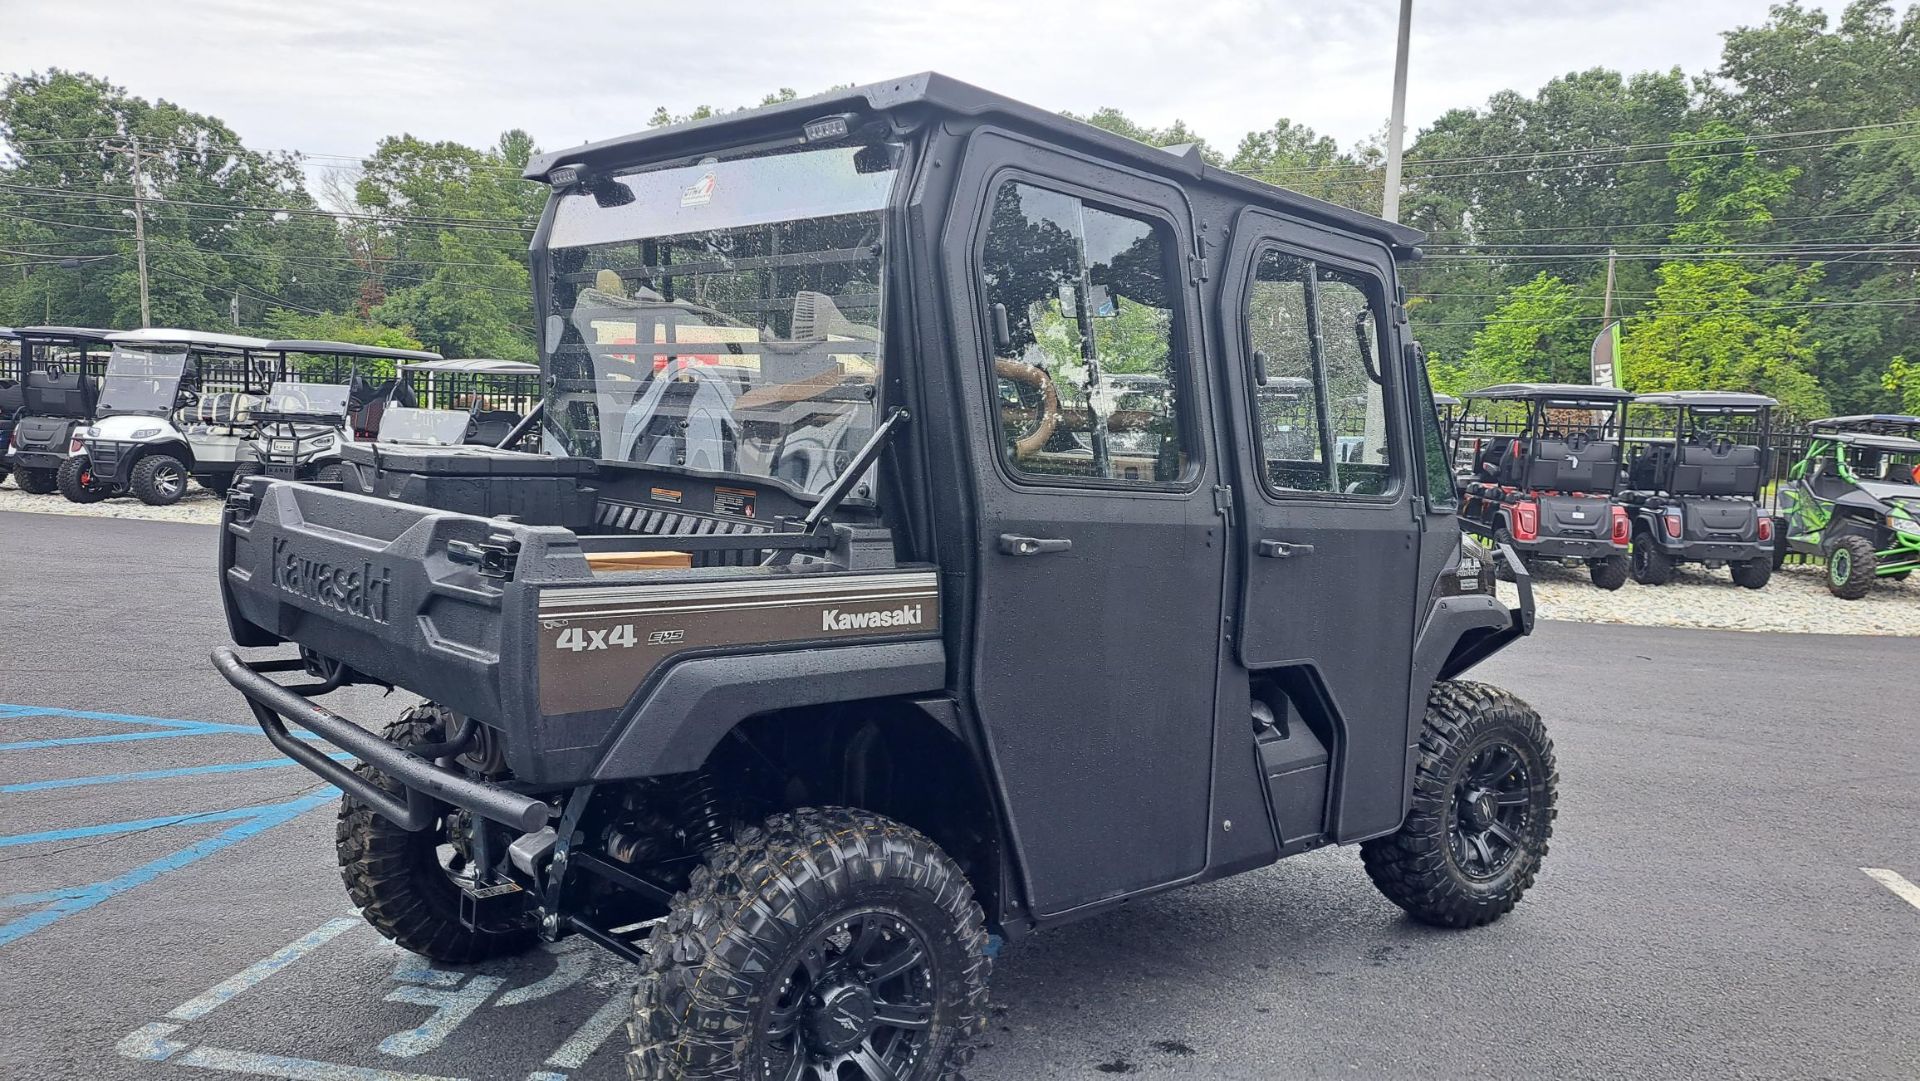 2023 Kawasaki Mule PRO-FXT Ranch Edition Platinum in Newfield, New Jersey - Photo 2